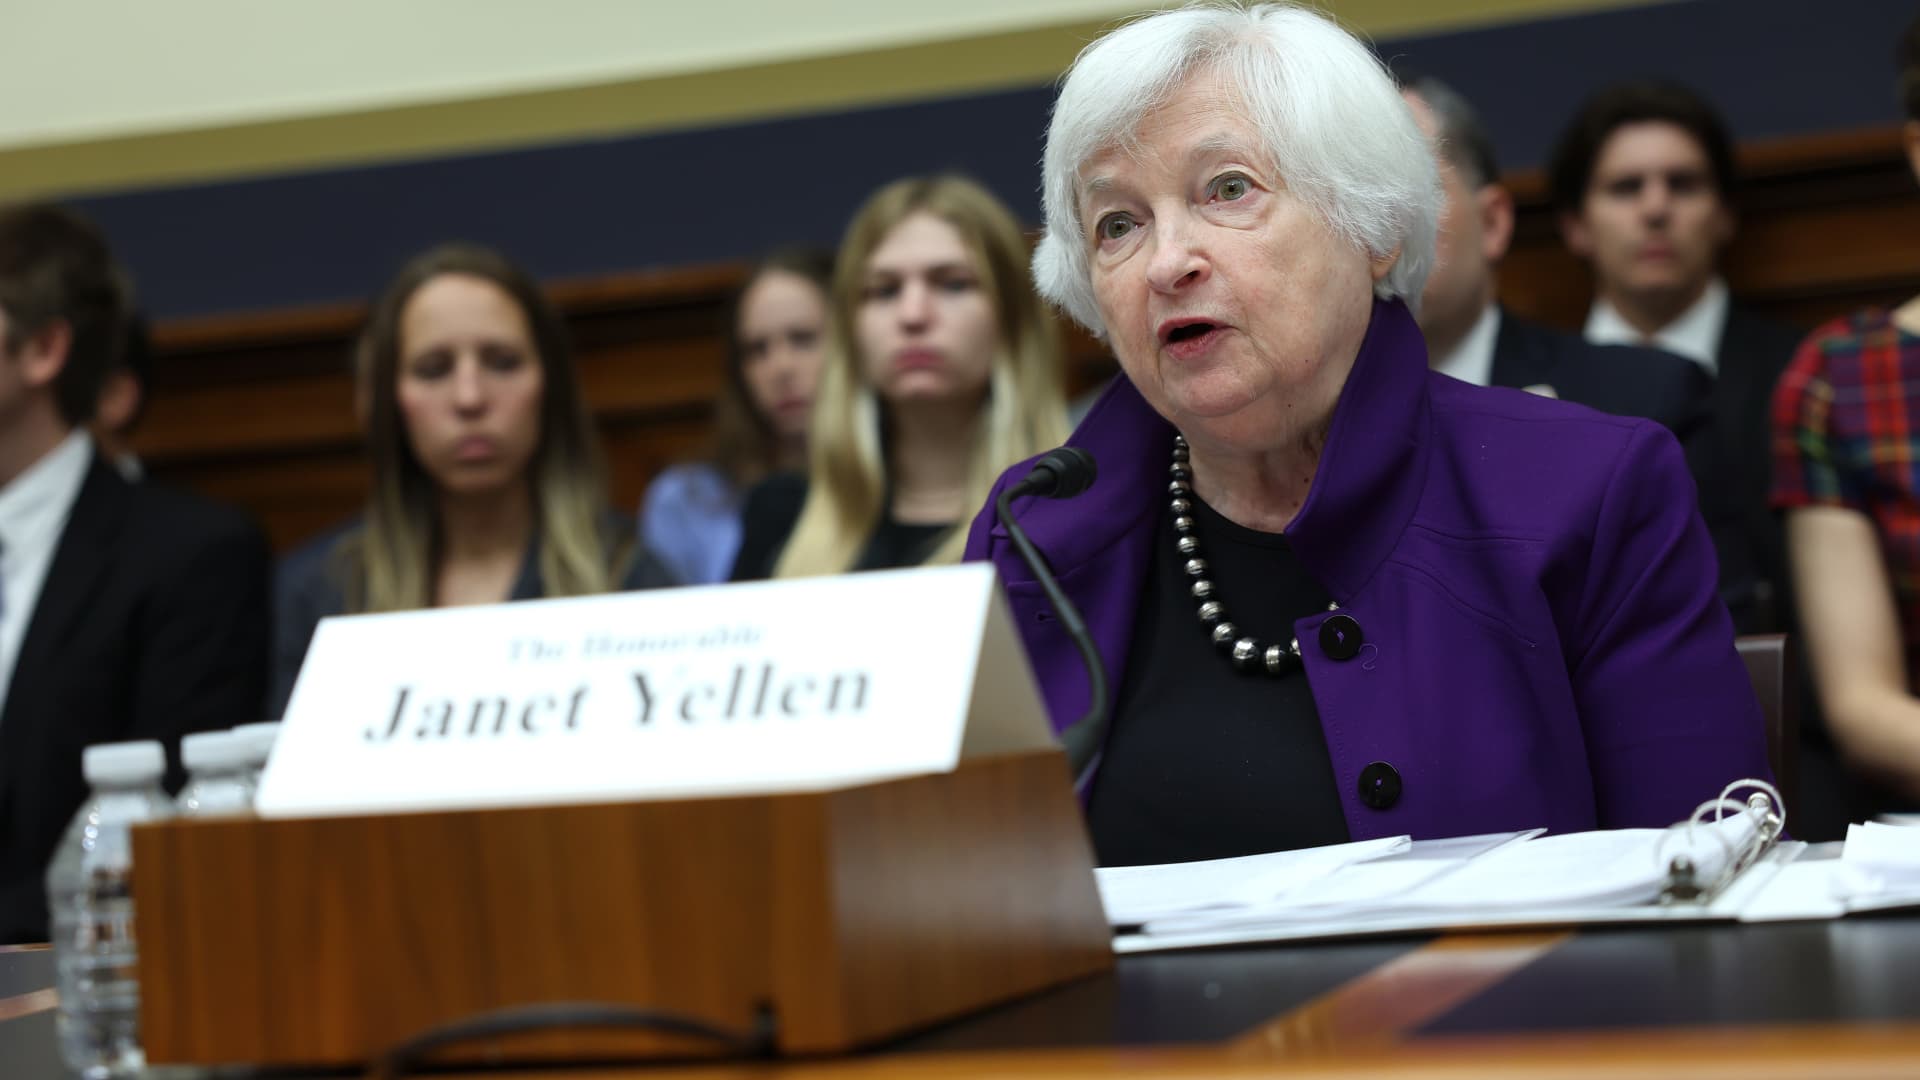 Janet Yellen arrives in Beijing on mission to find common ground for U.S. and China